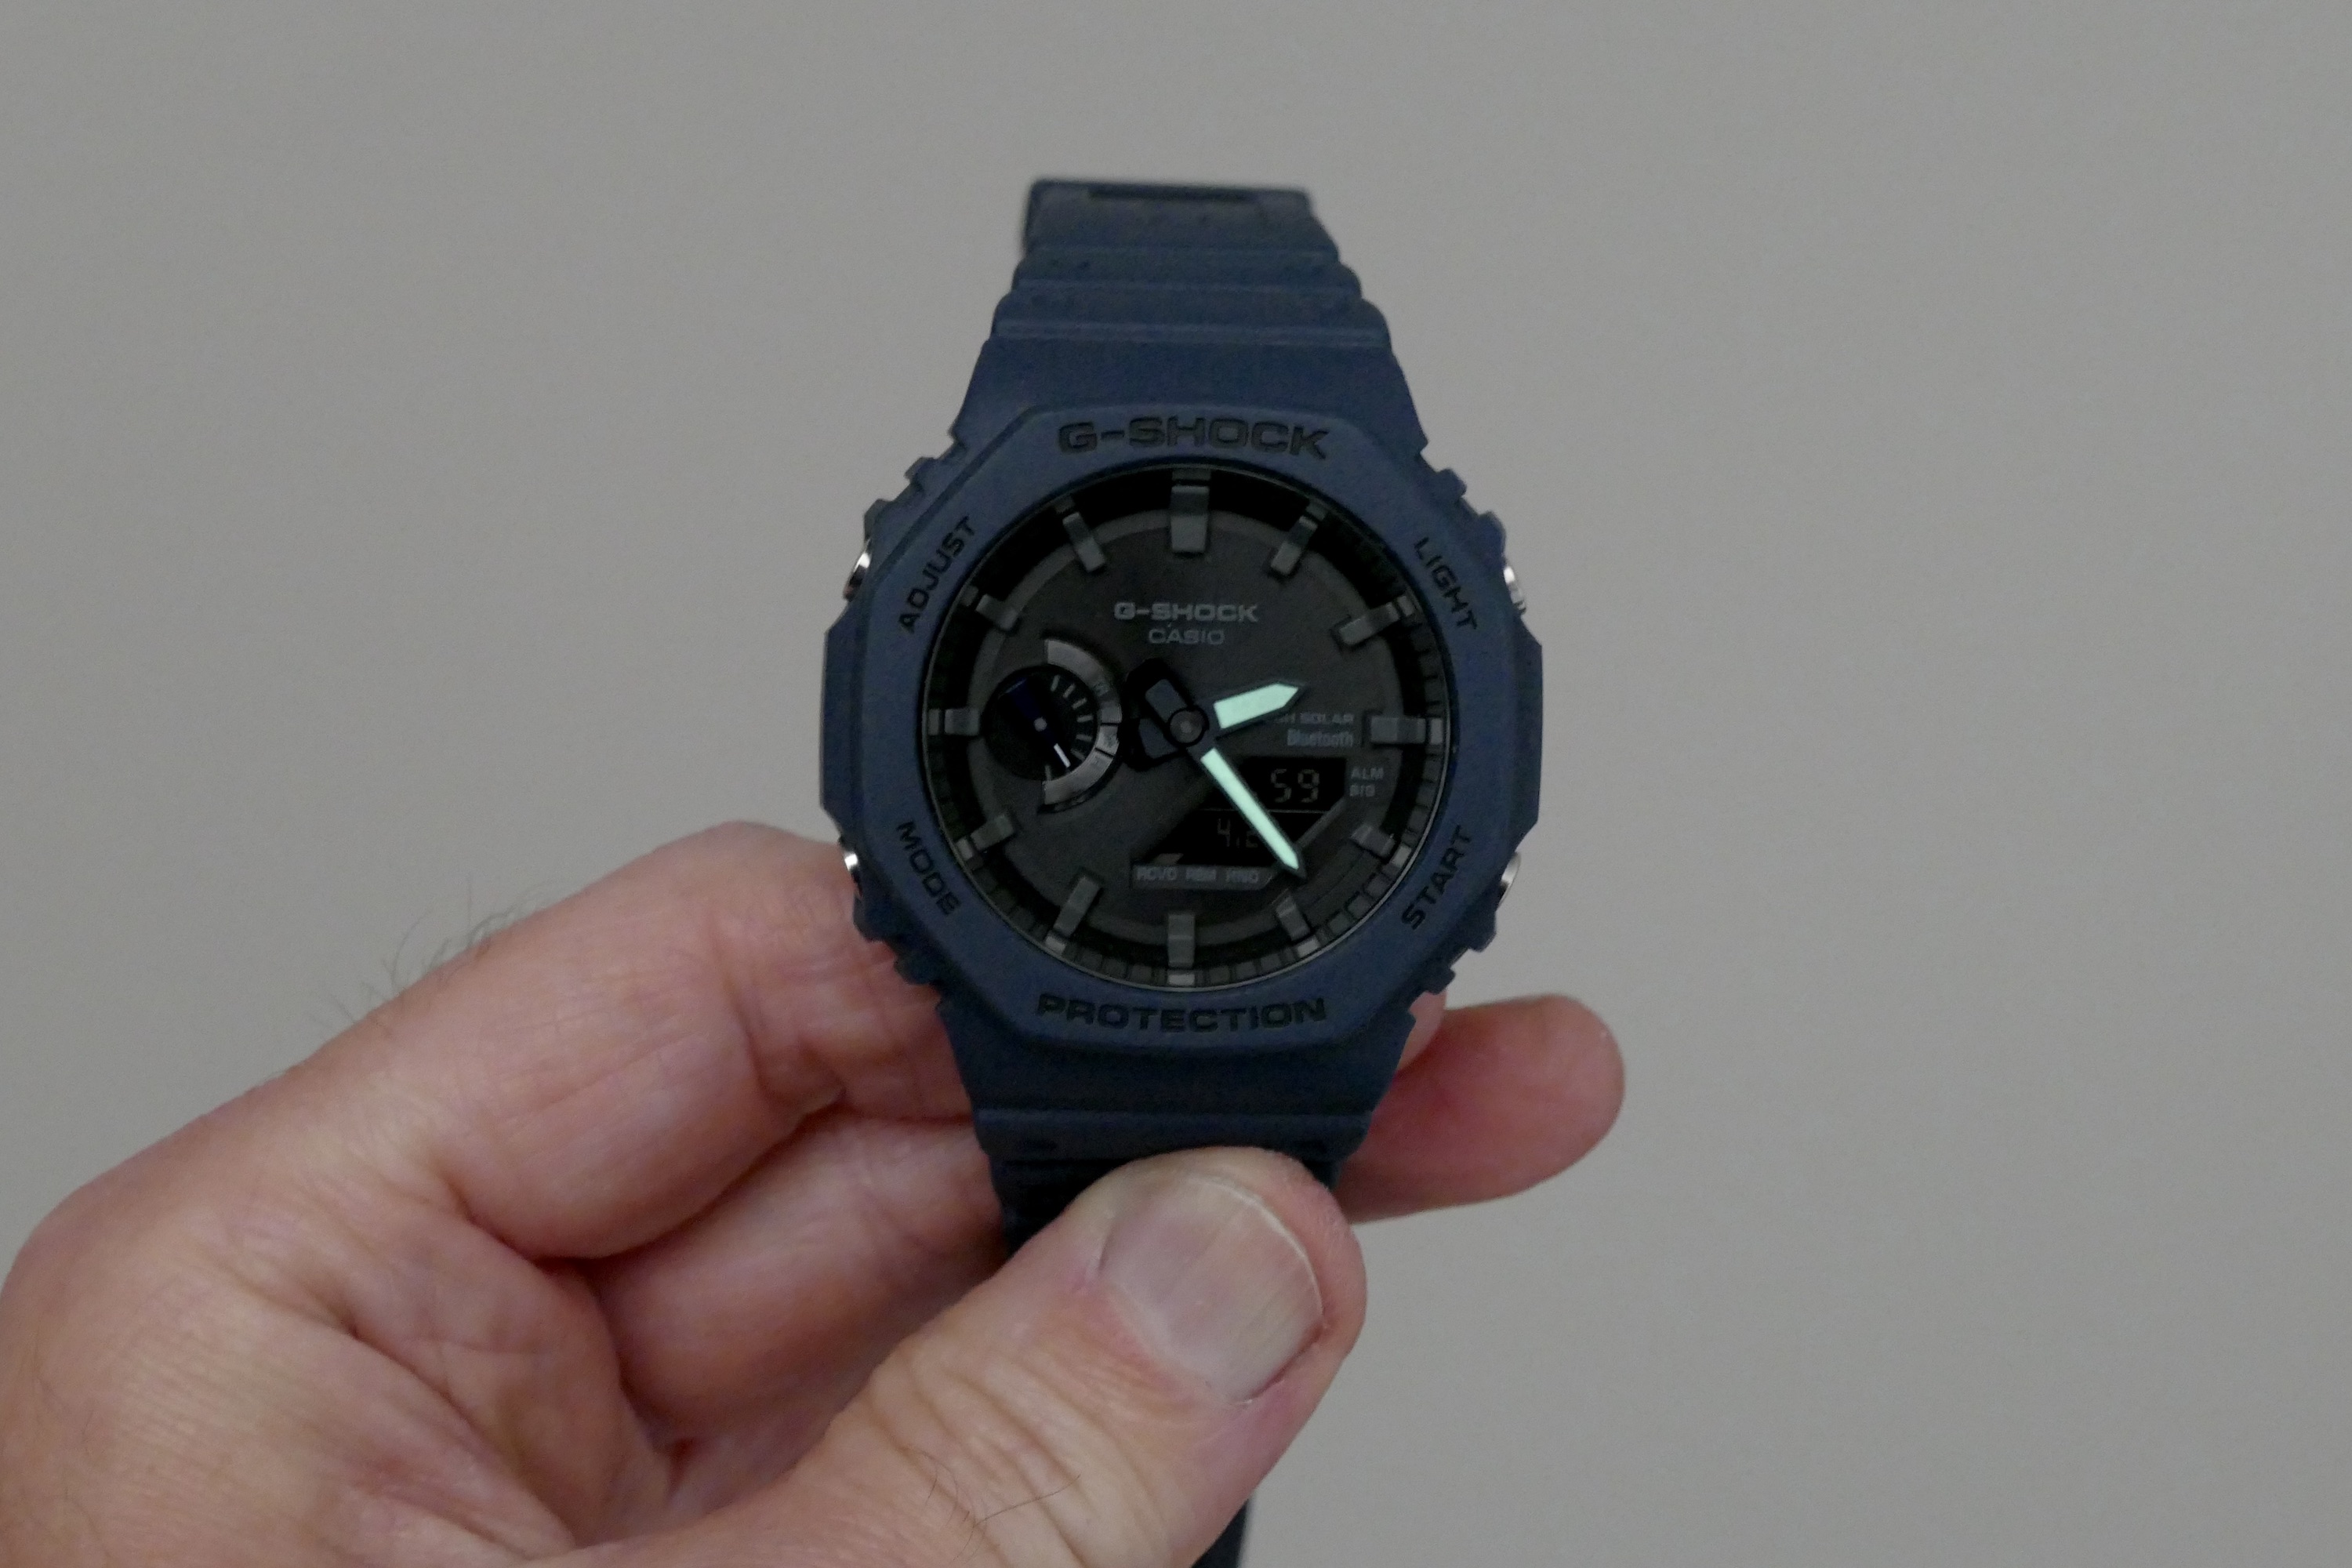 Lowlight photo showing the G-Shock GA-B2100 lume on its hour and minute hands.